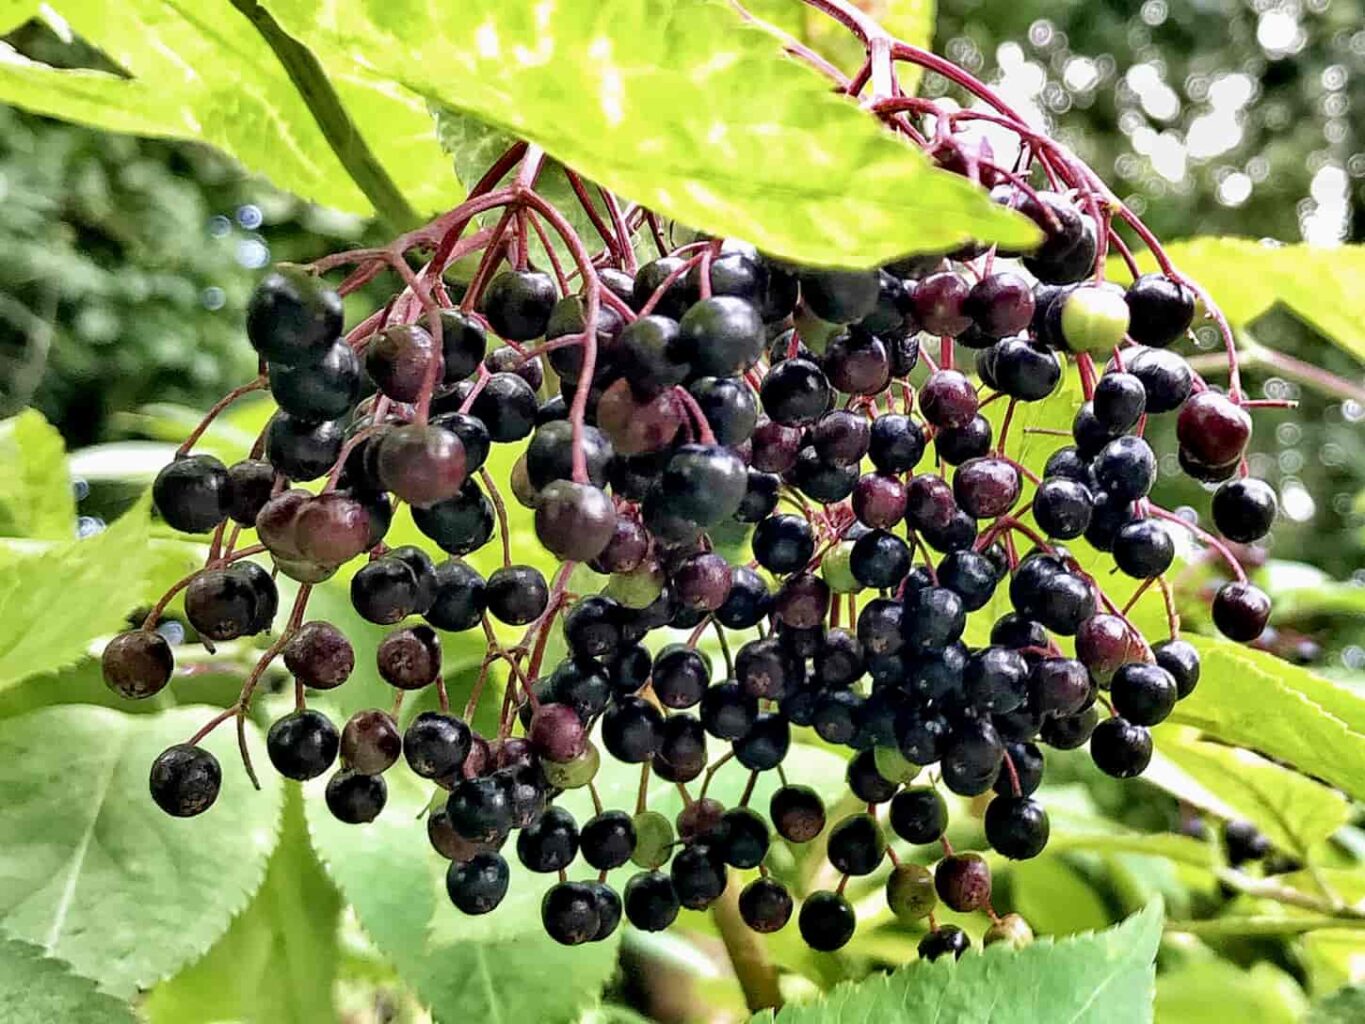 An image of an Elderberry plant that can grow to around 9m.